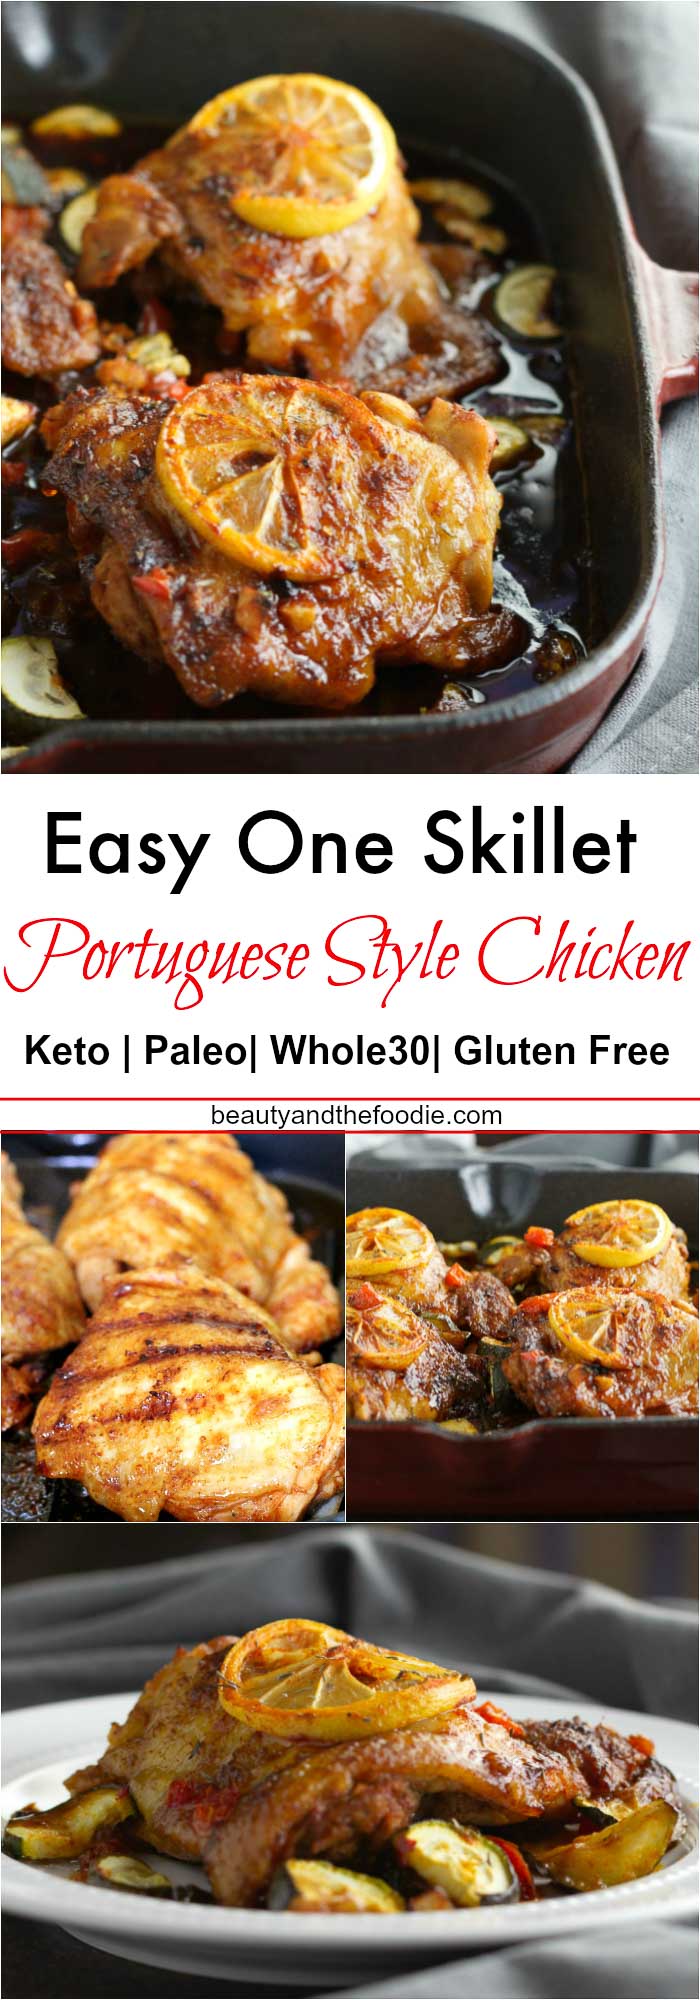 One Skillet Keto Portuguese Style Chicken- low carb, paleo and Whole30.